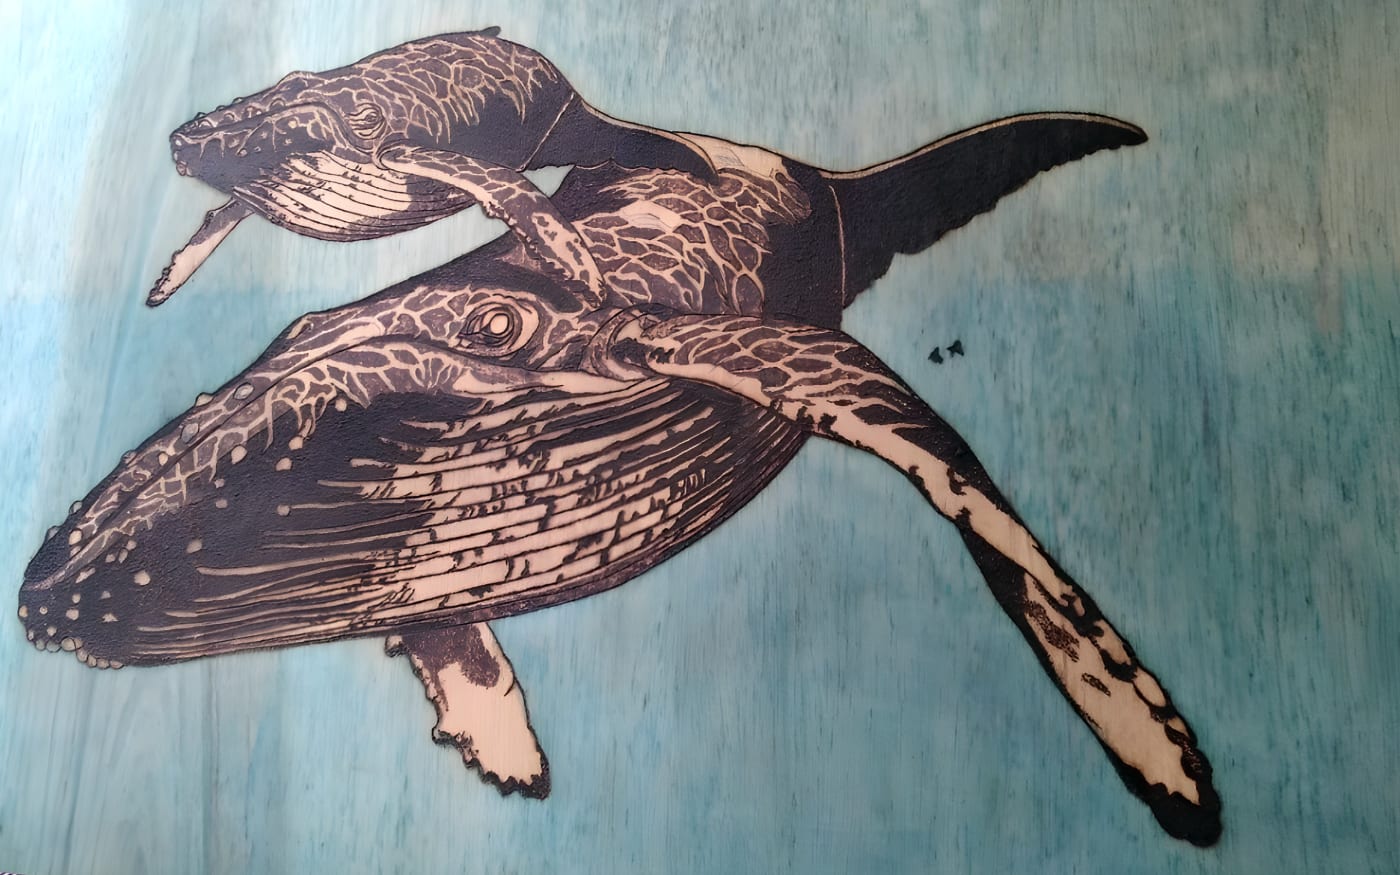 Whale art by Myangah Pirate, a Budawang artist from the Yuin Nation (Photo courtesy of Myangah Pirate)